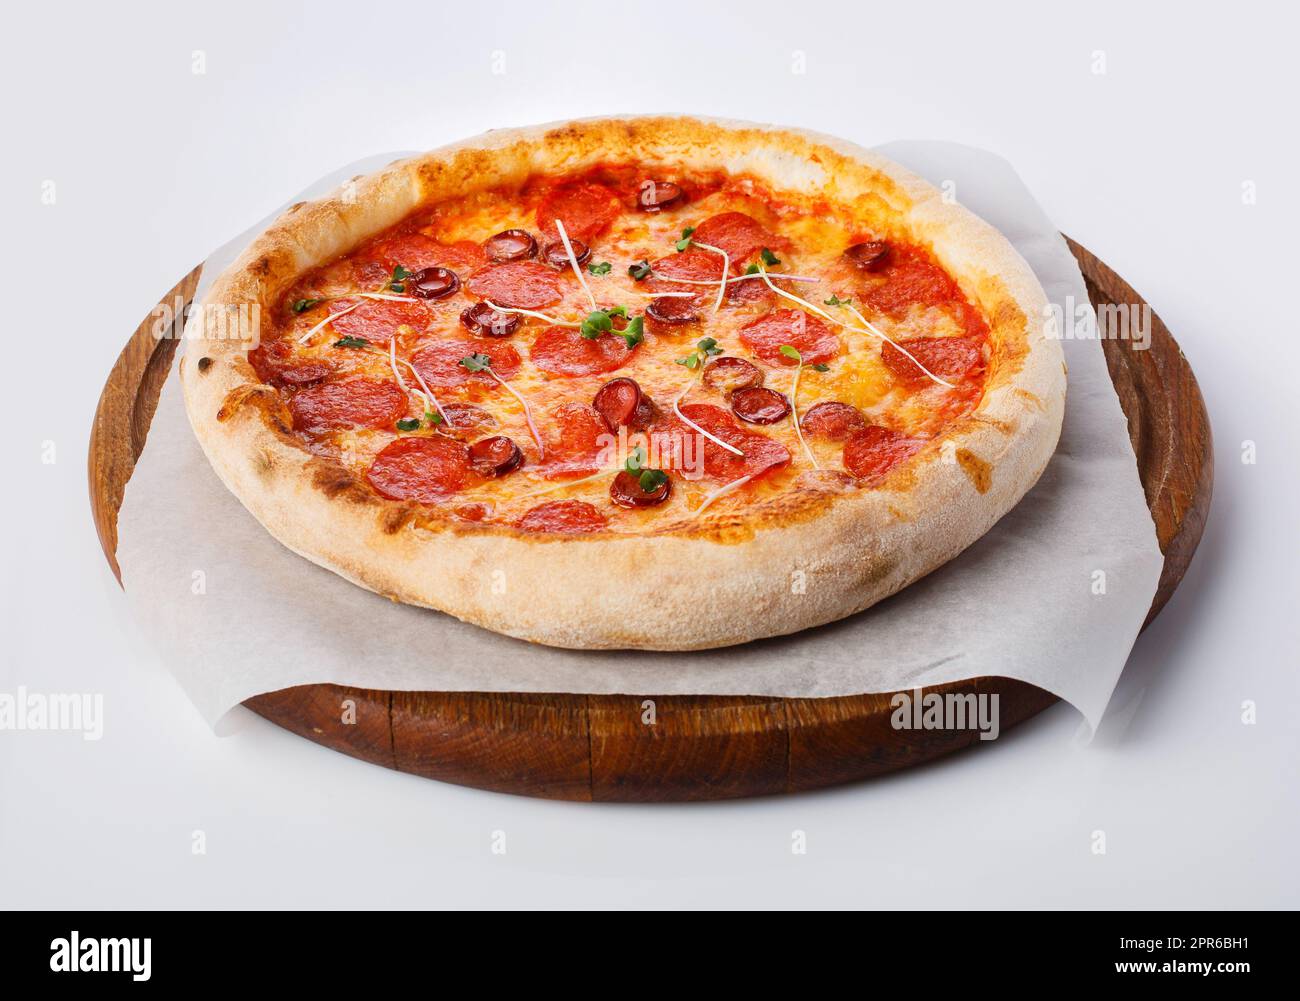 Top view of hot pizza on a wooden stand. Stock Photo